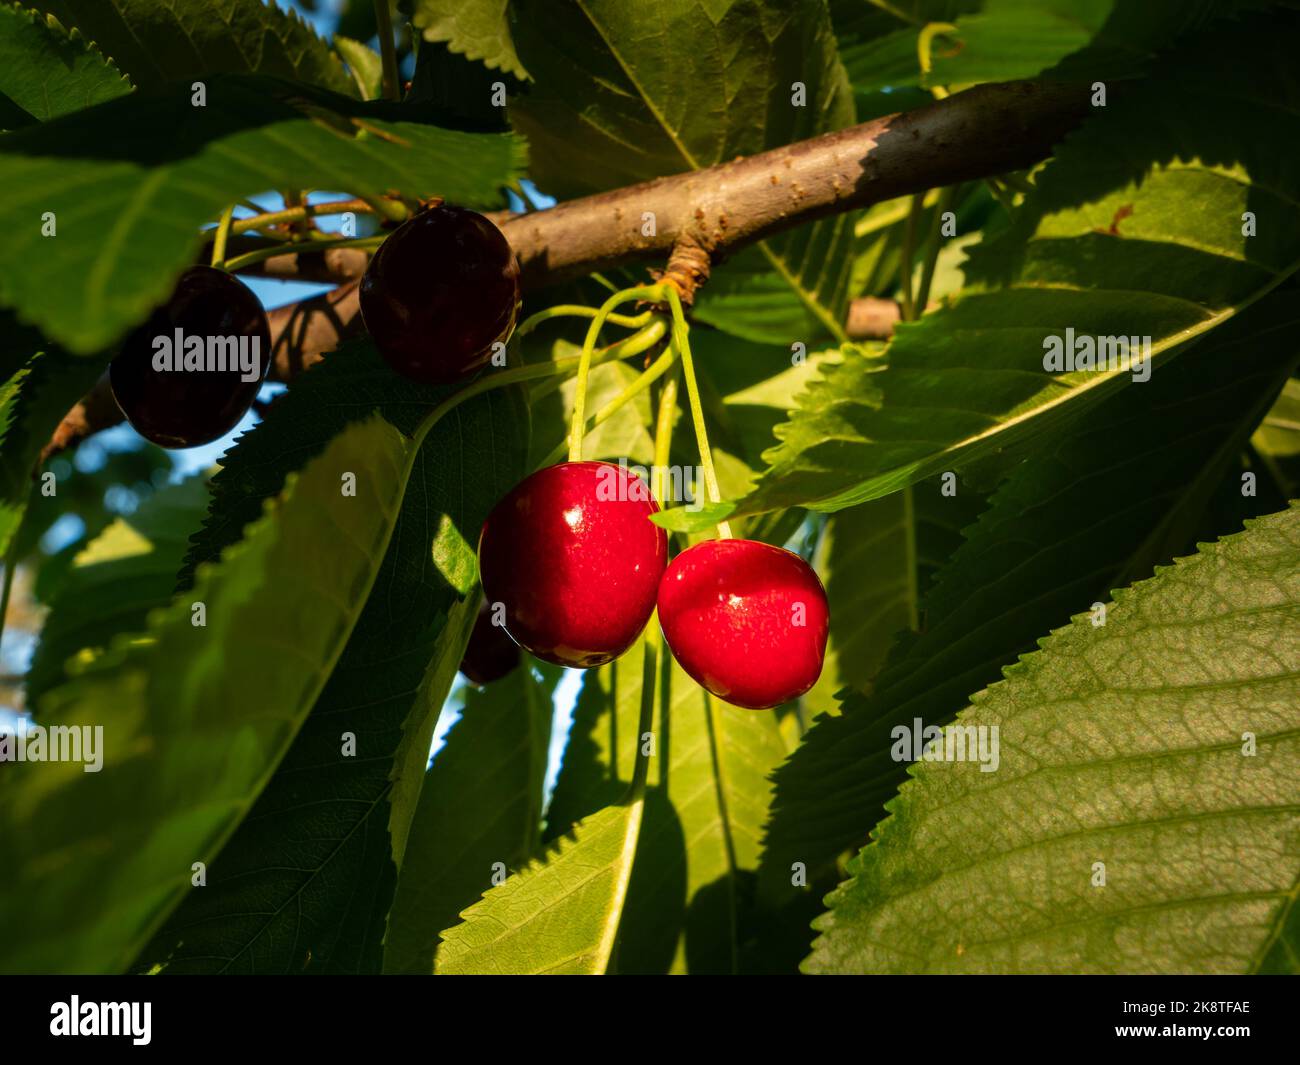 Pair of red juicy cherries on a tree. The sweet fruits are glowing in the evening sunlight. Close-up of the fresh raw organic food in the nature. Stock Photo